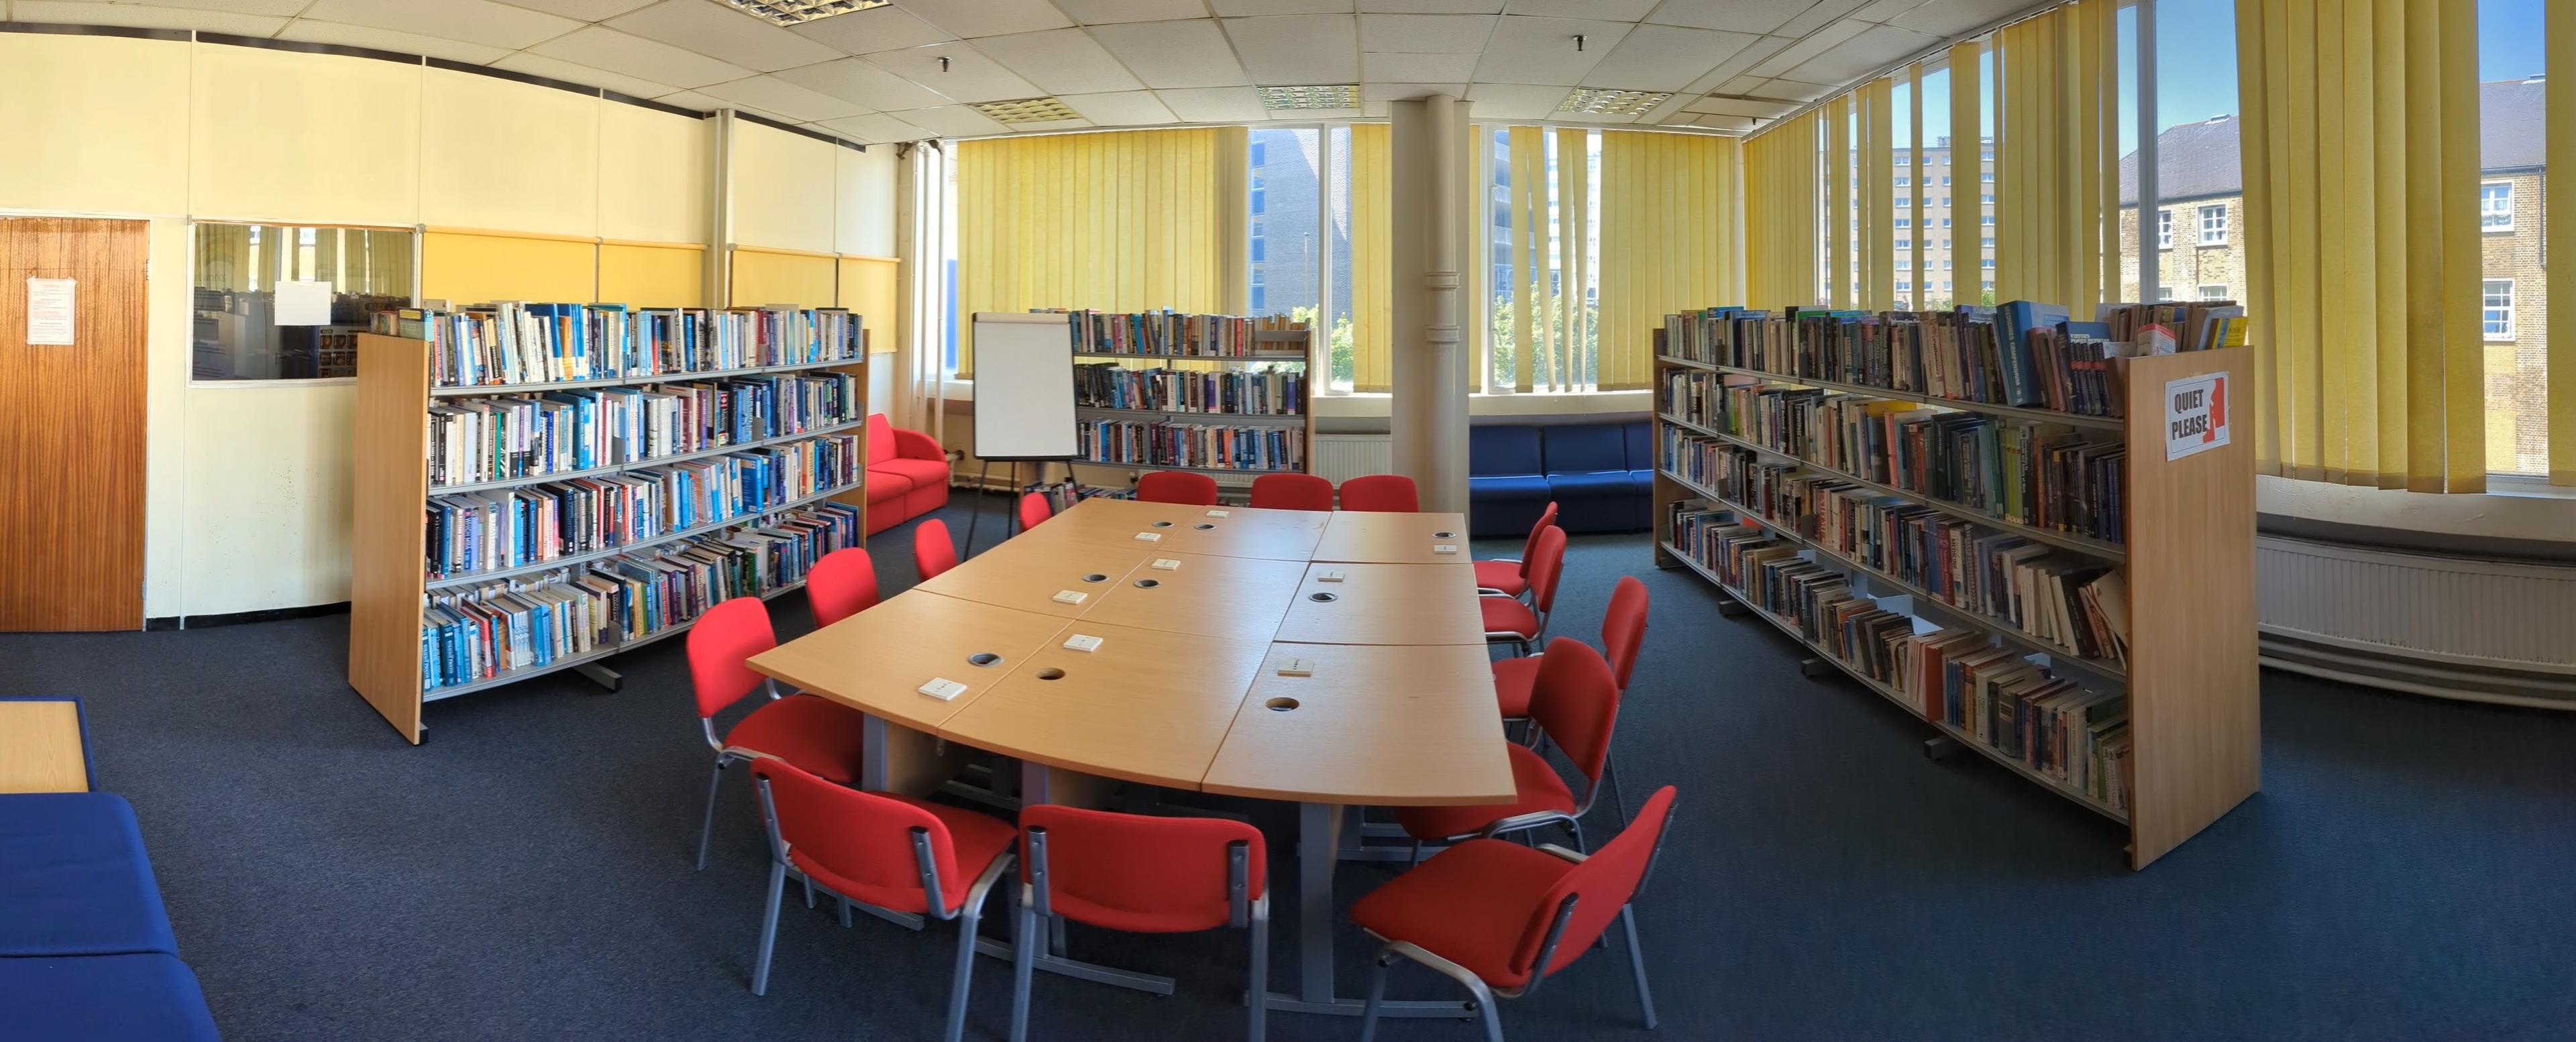 Library/Classroom, The Woolwich College photo #1